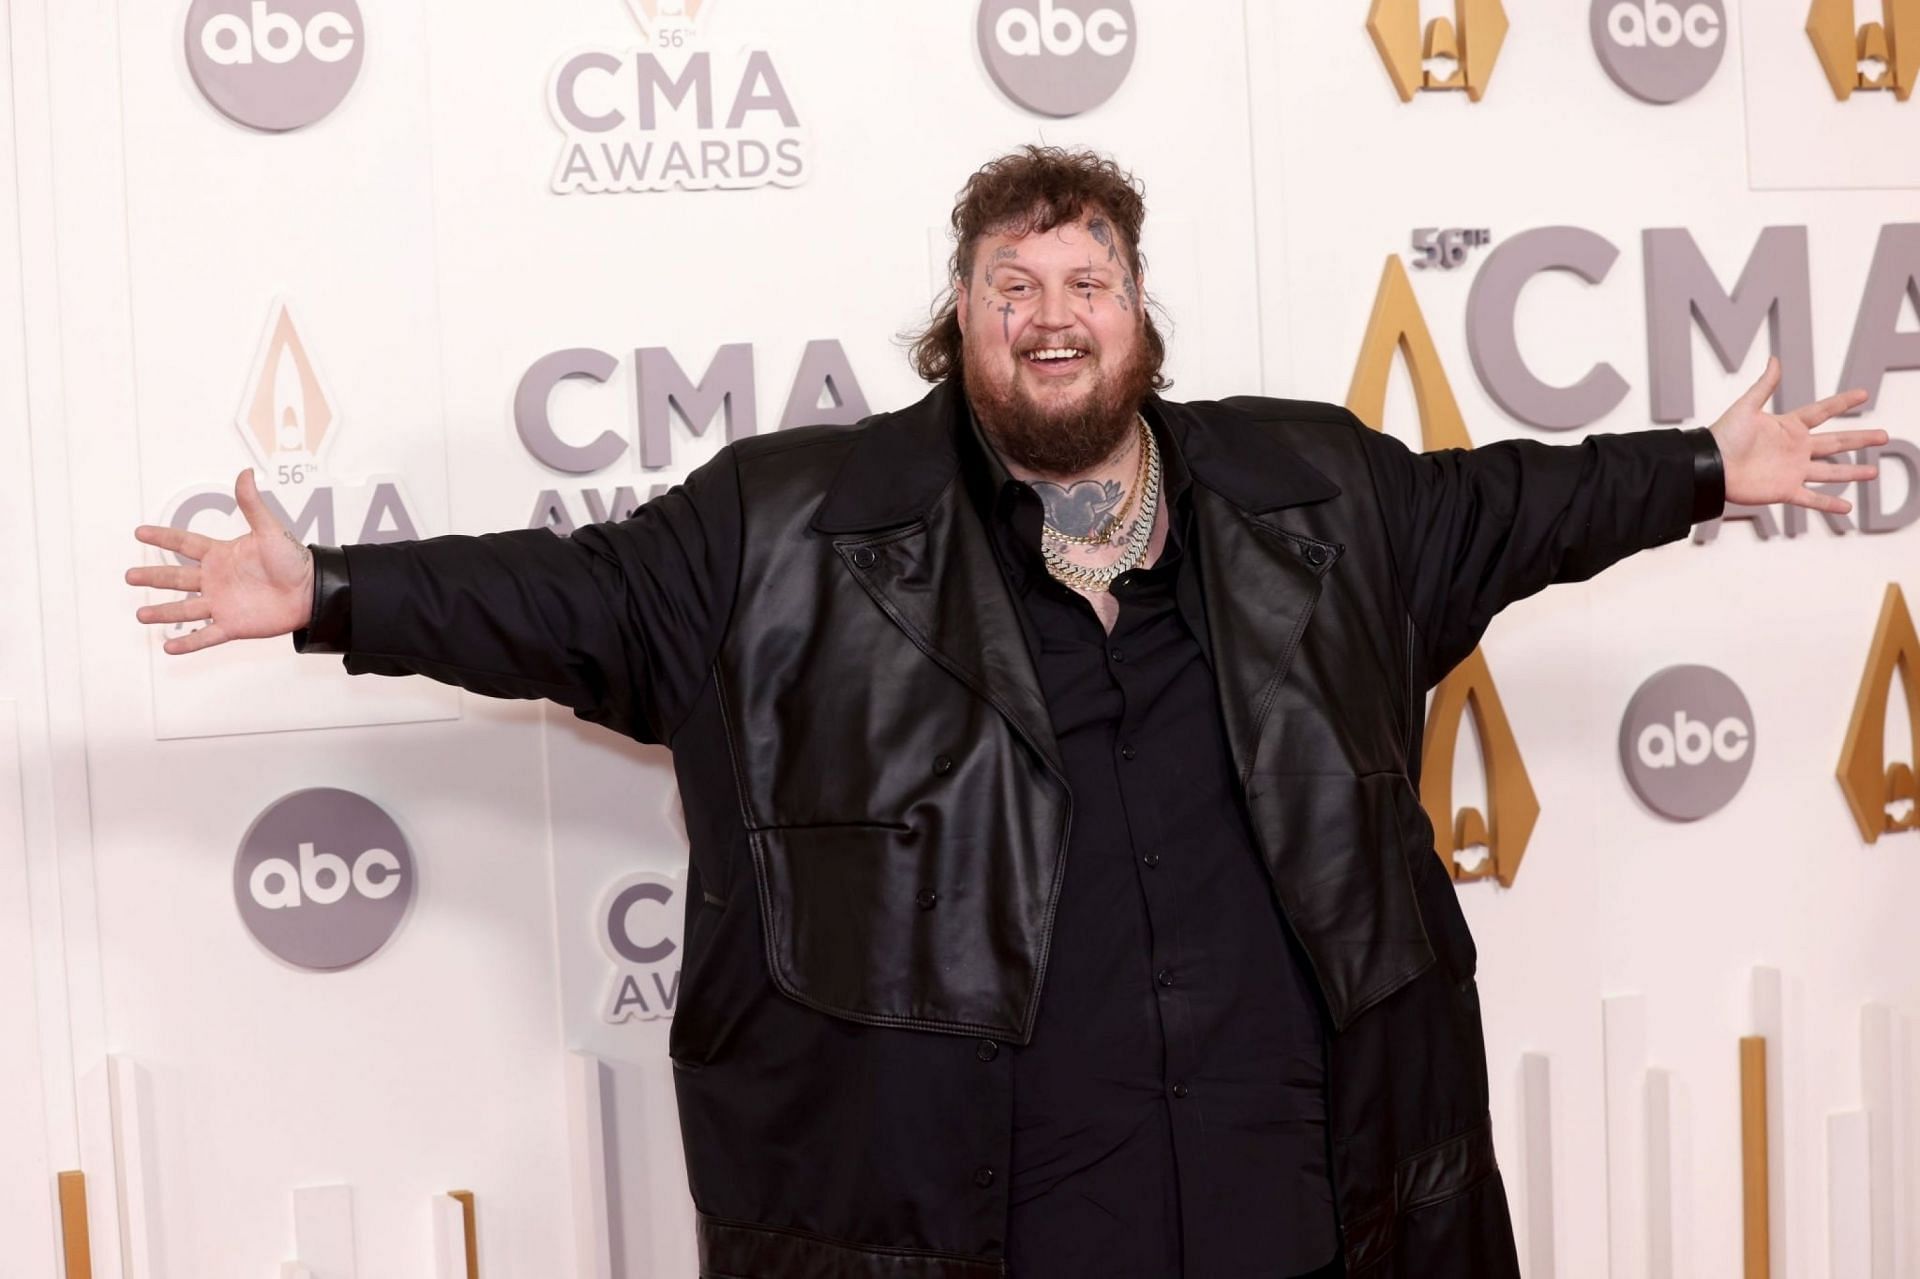 Jelly Roll, one of the winners of CMT Awards 2023,  at the The 56th Annual CMA Awards at Bridgestone Arena on November 09, 2022 in Nashville, Tennessee.(Image via Getty Images)